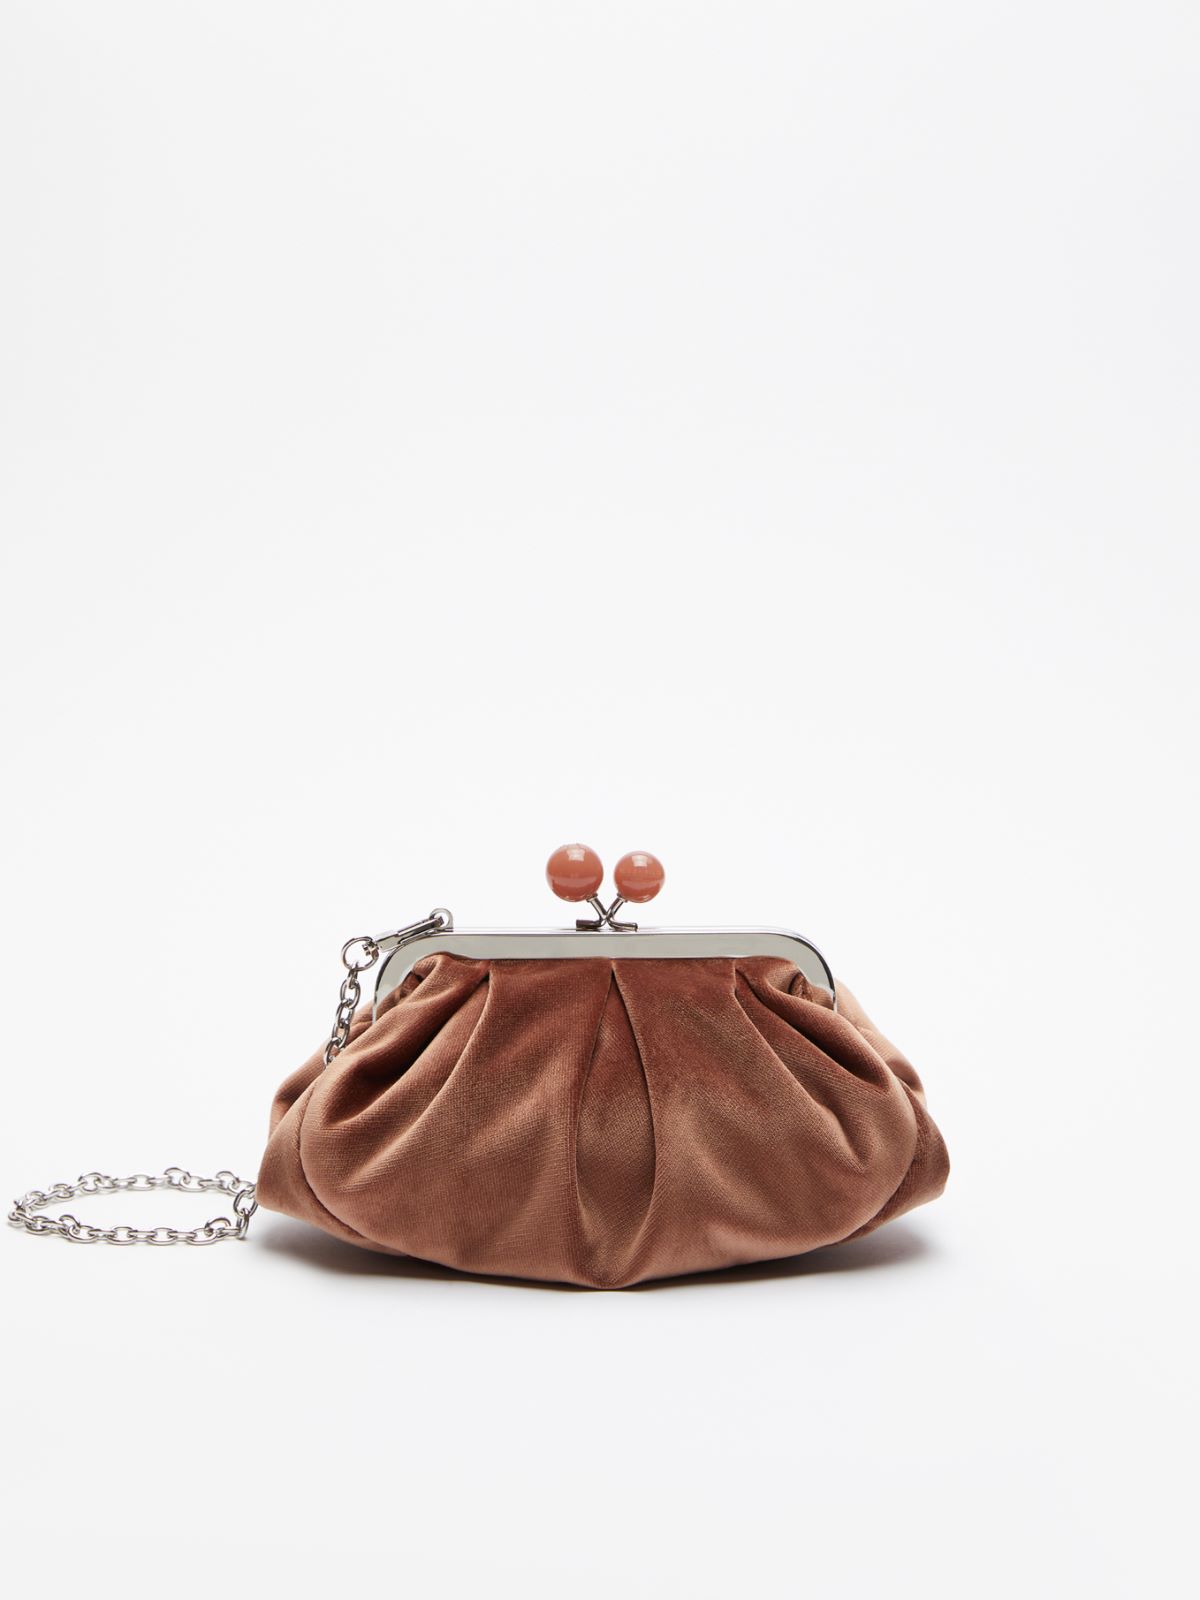 Small Pasticcino Bag in velvet - EARTH - Weekend Max Mara